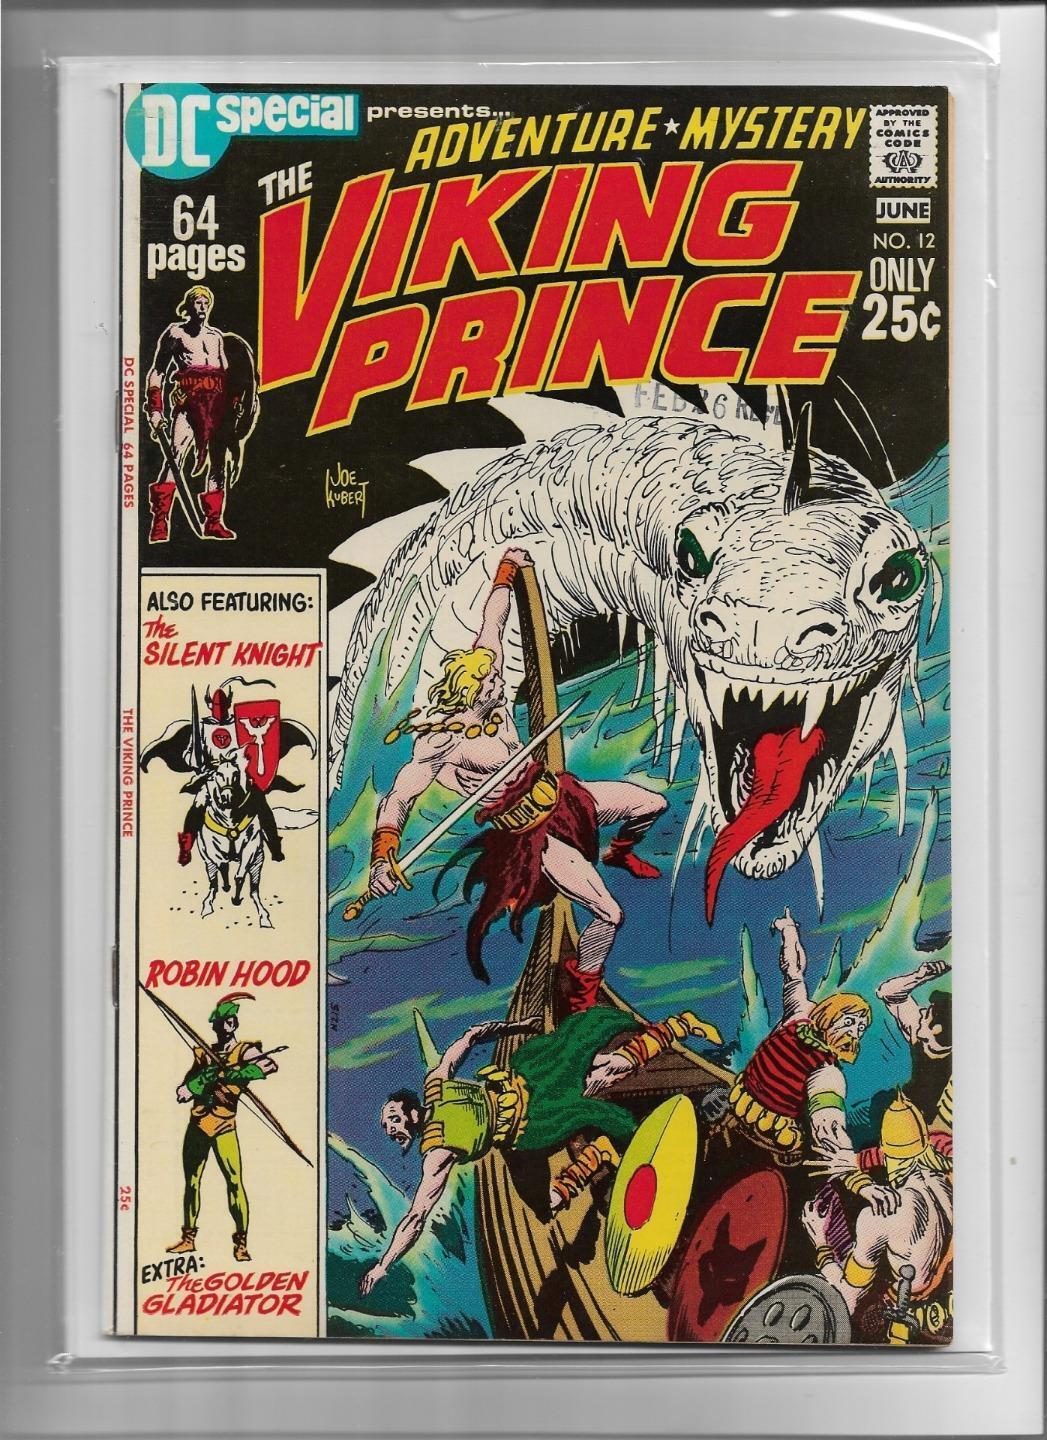 DC SPECIAL #12 1971 NEAR MINT- 9.2 4314 VIKING PRINCE